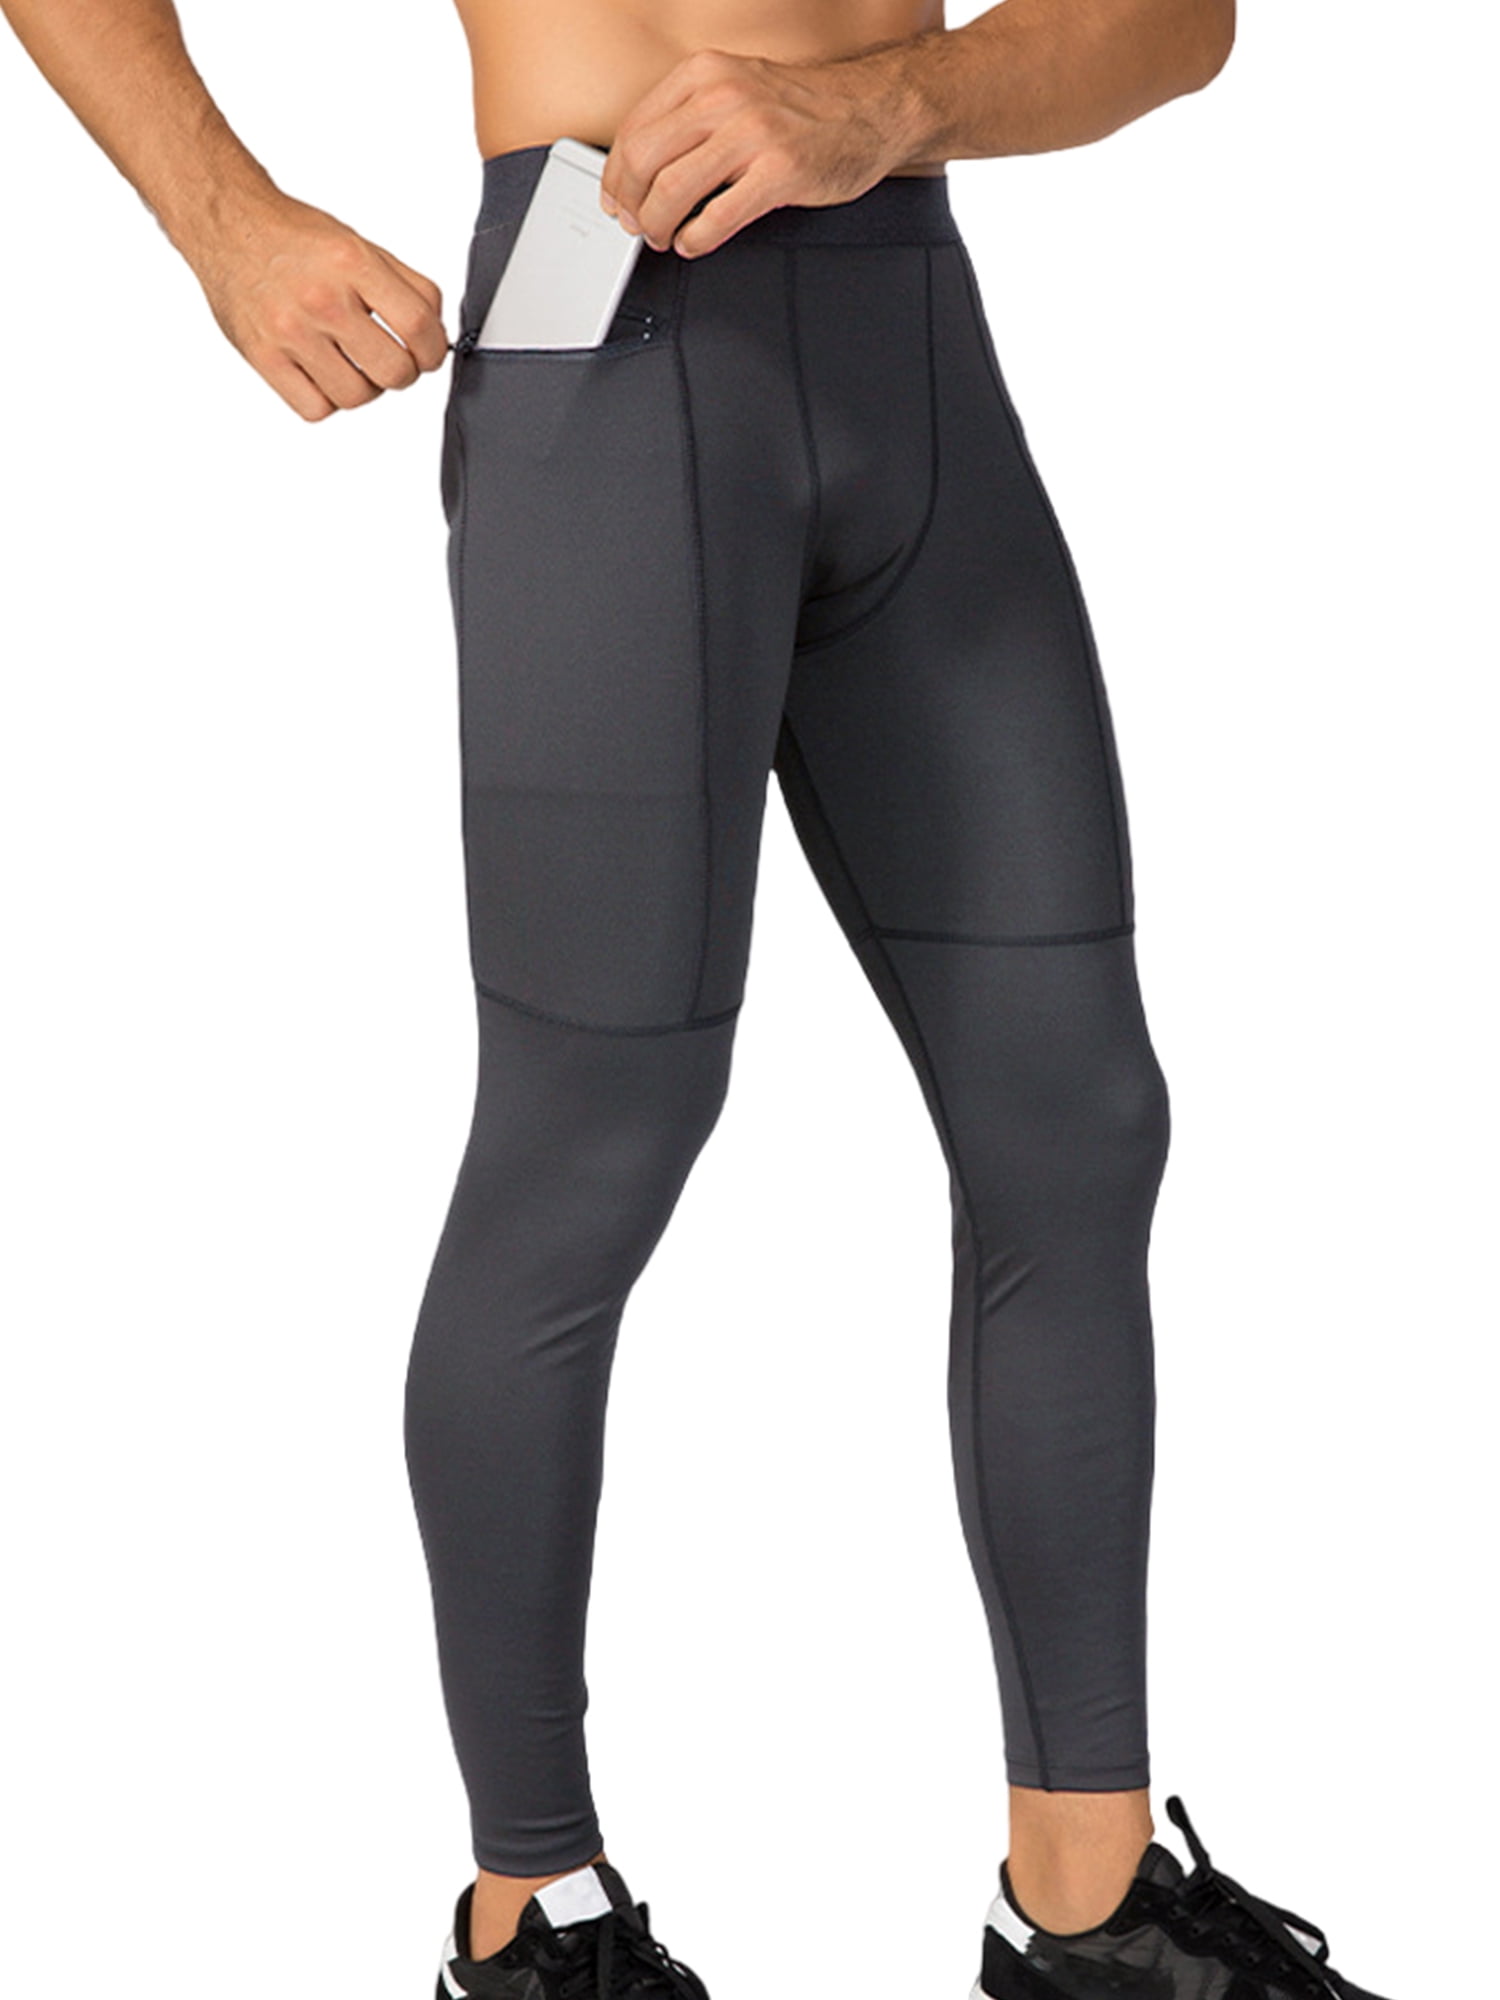 TSLA Men's Athletic Compression Shorts, Sports Performance Active Cool Dry  Running Tights